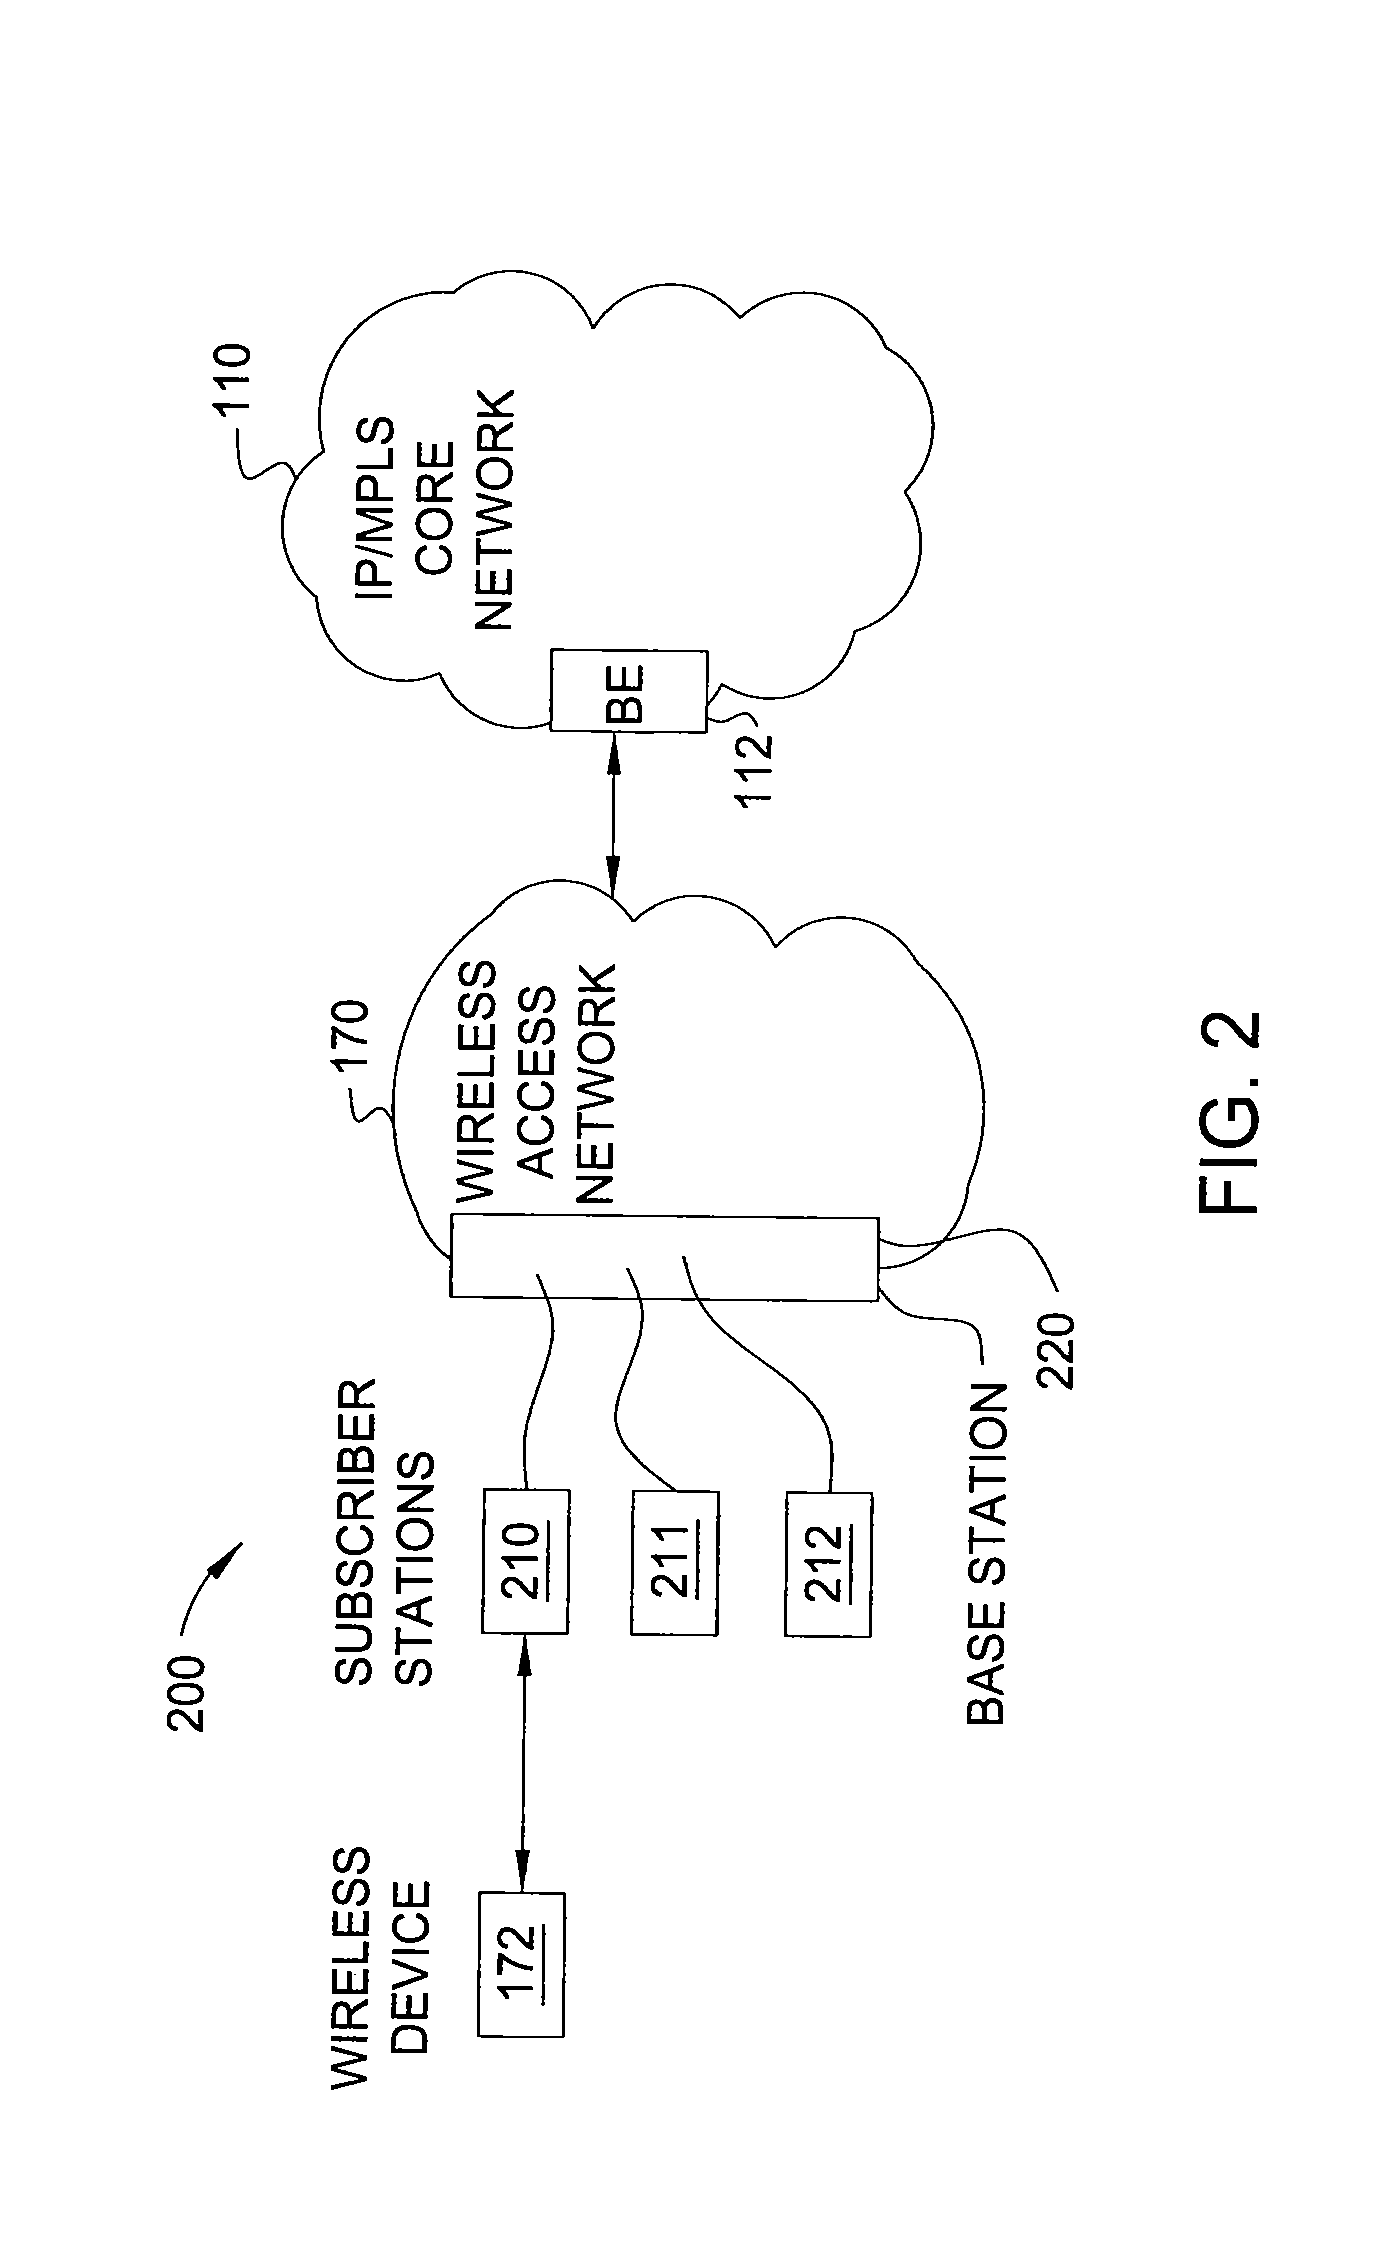 Method and apparatus for allocating bandwidth for a network